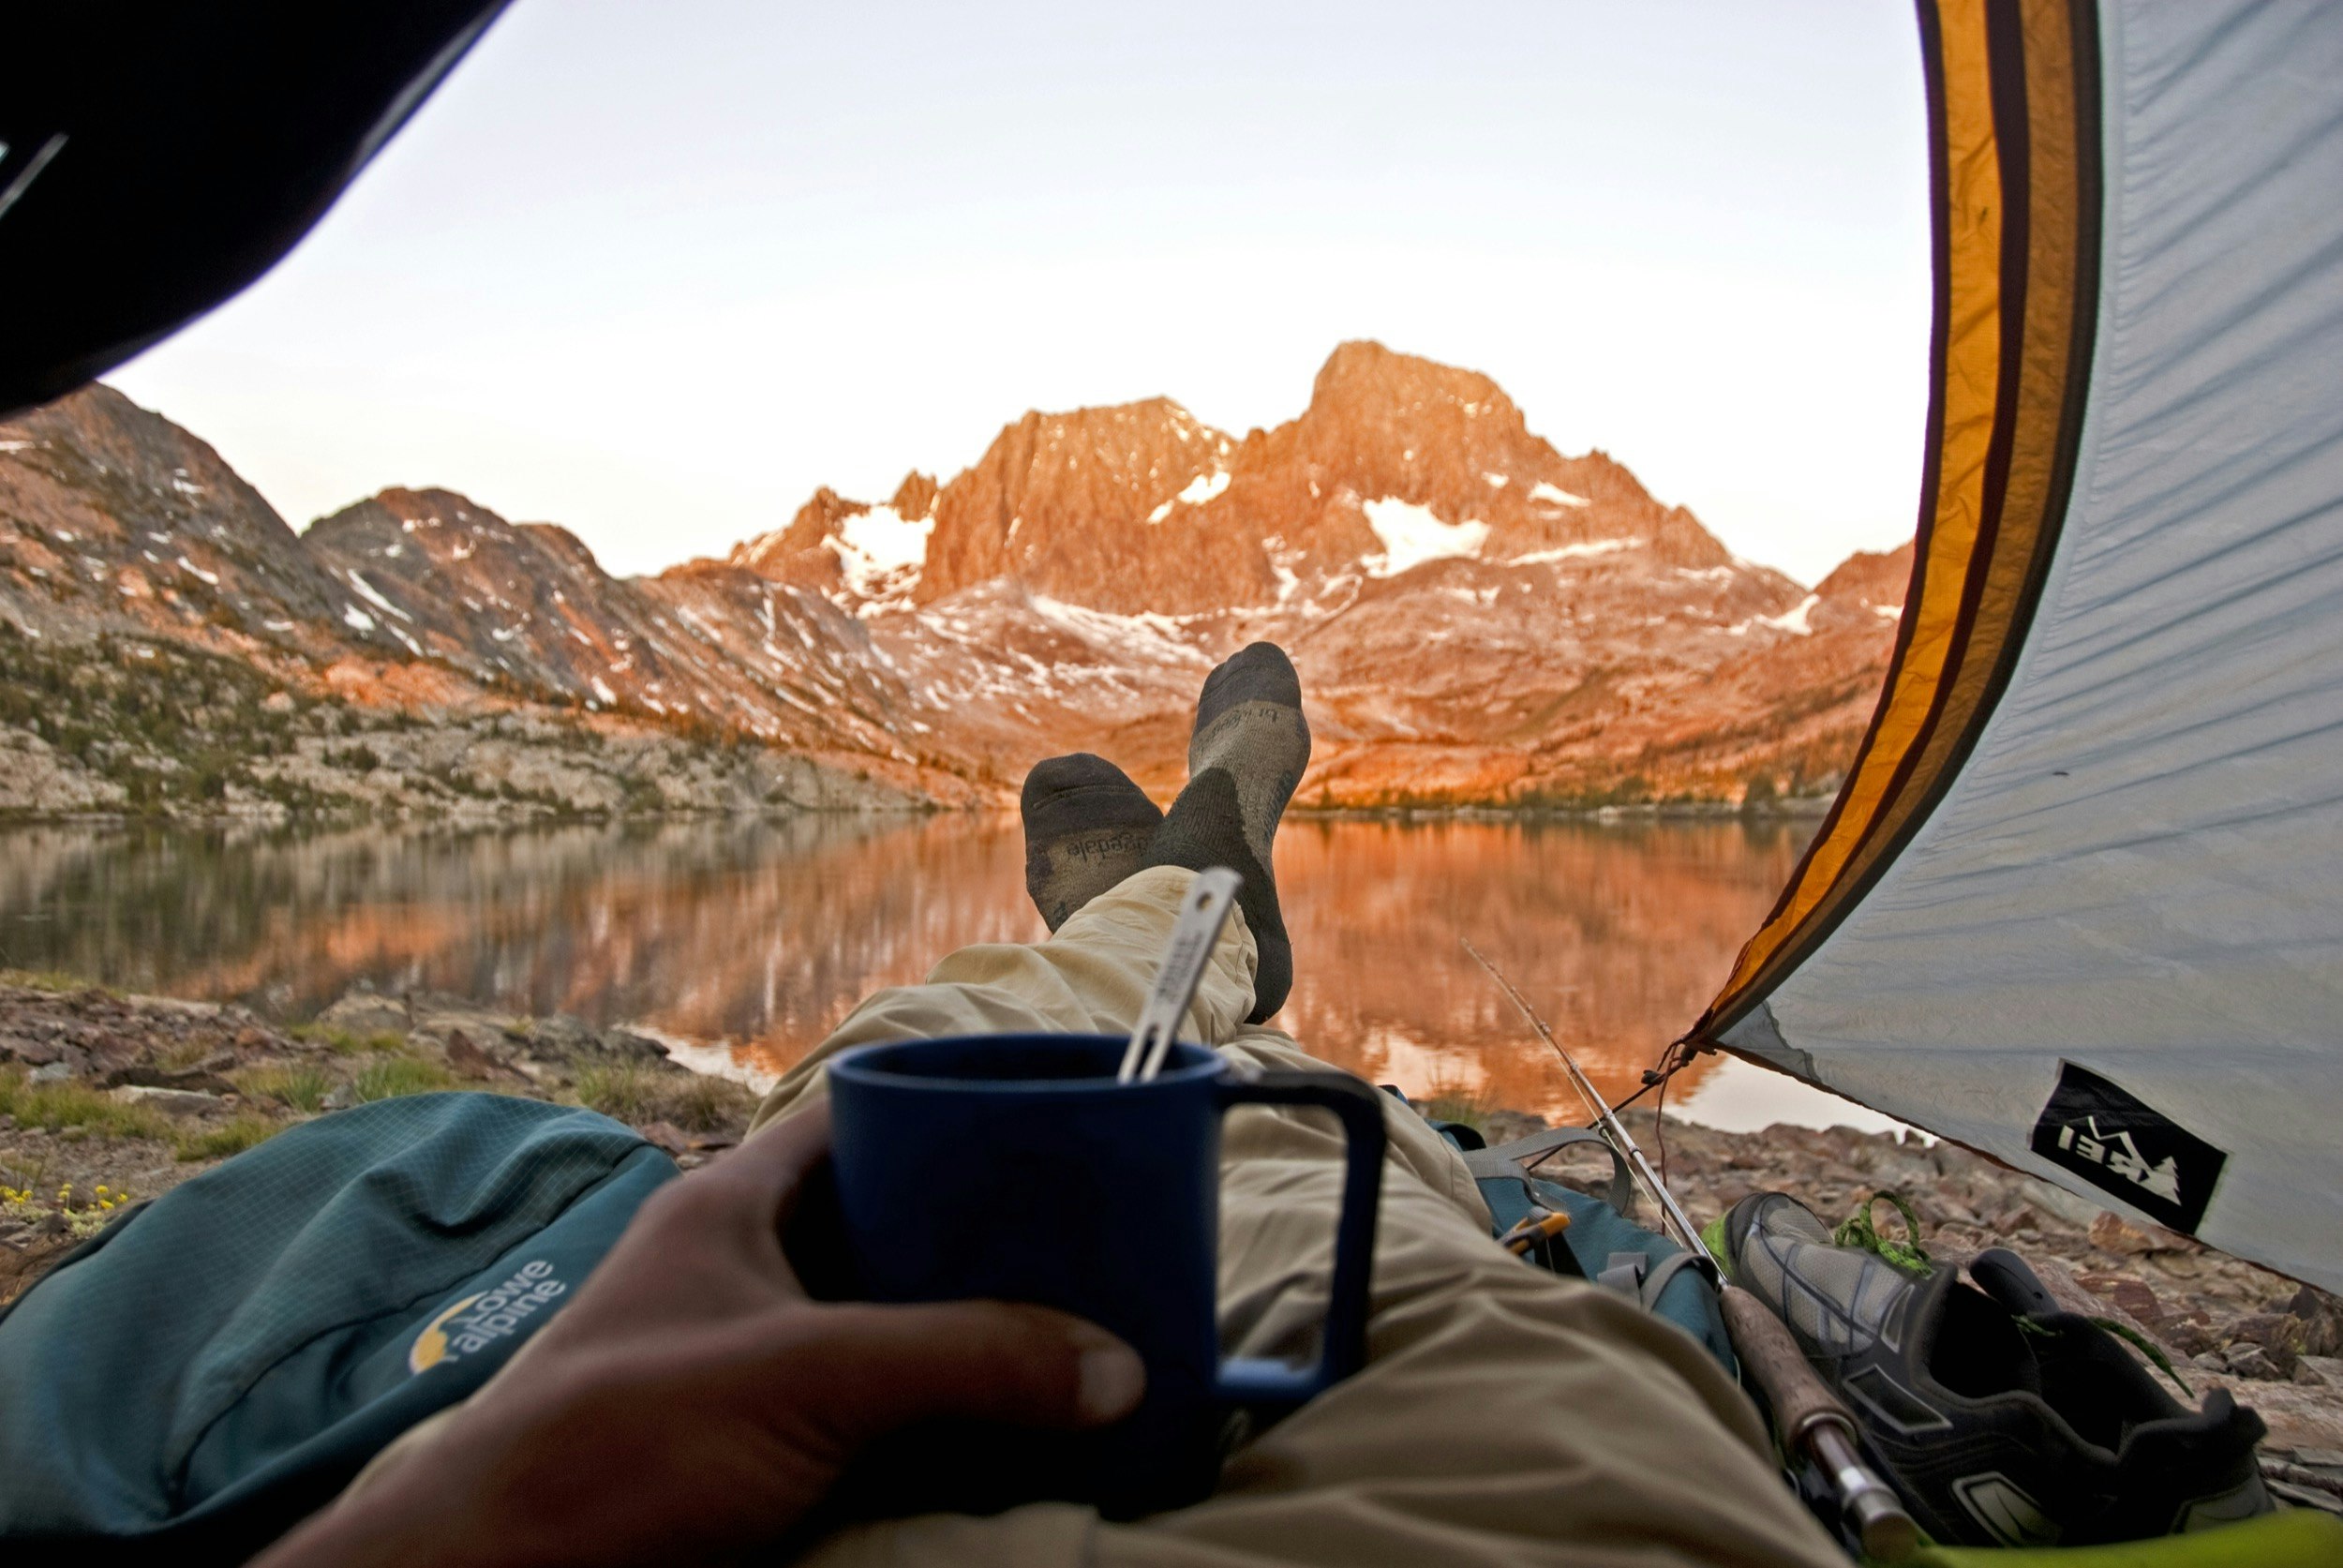 Looking out the entryway of a tent with the mountains of the Sierra Nevada in the distance, a man's feet and a cup of soup is balanced on his stomach.